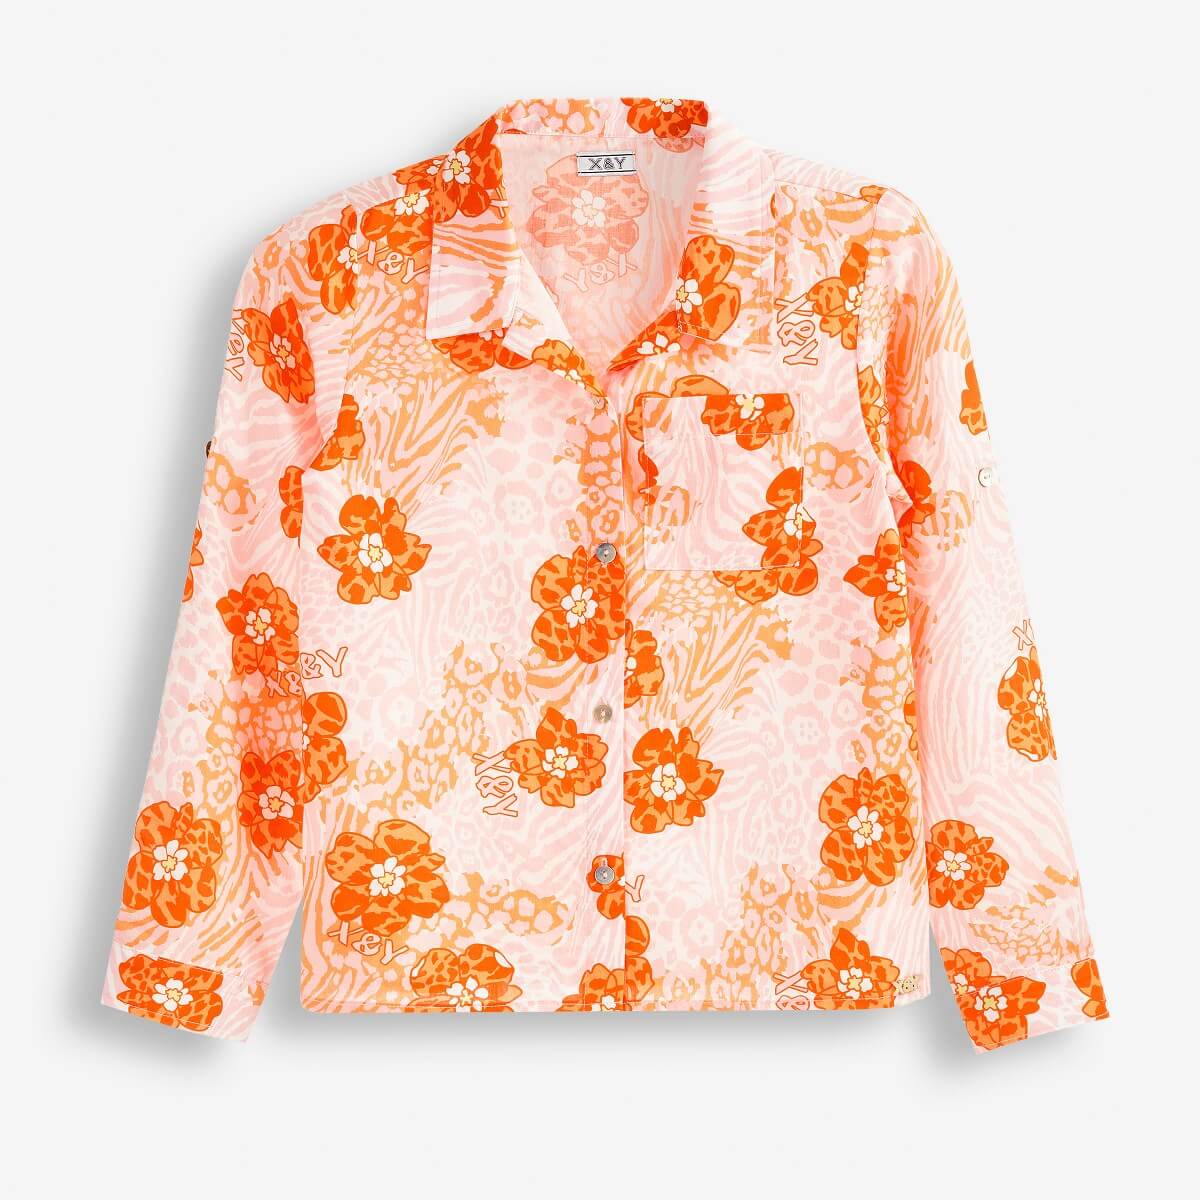 Girls' Collared Shirt with an All-Over Floral Print